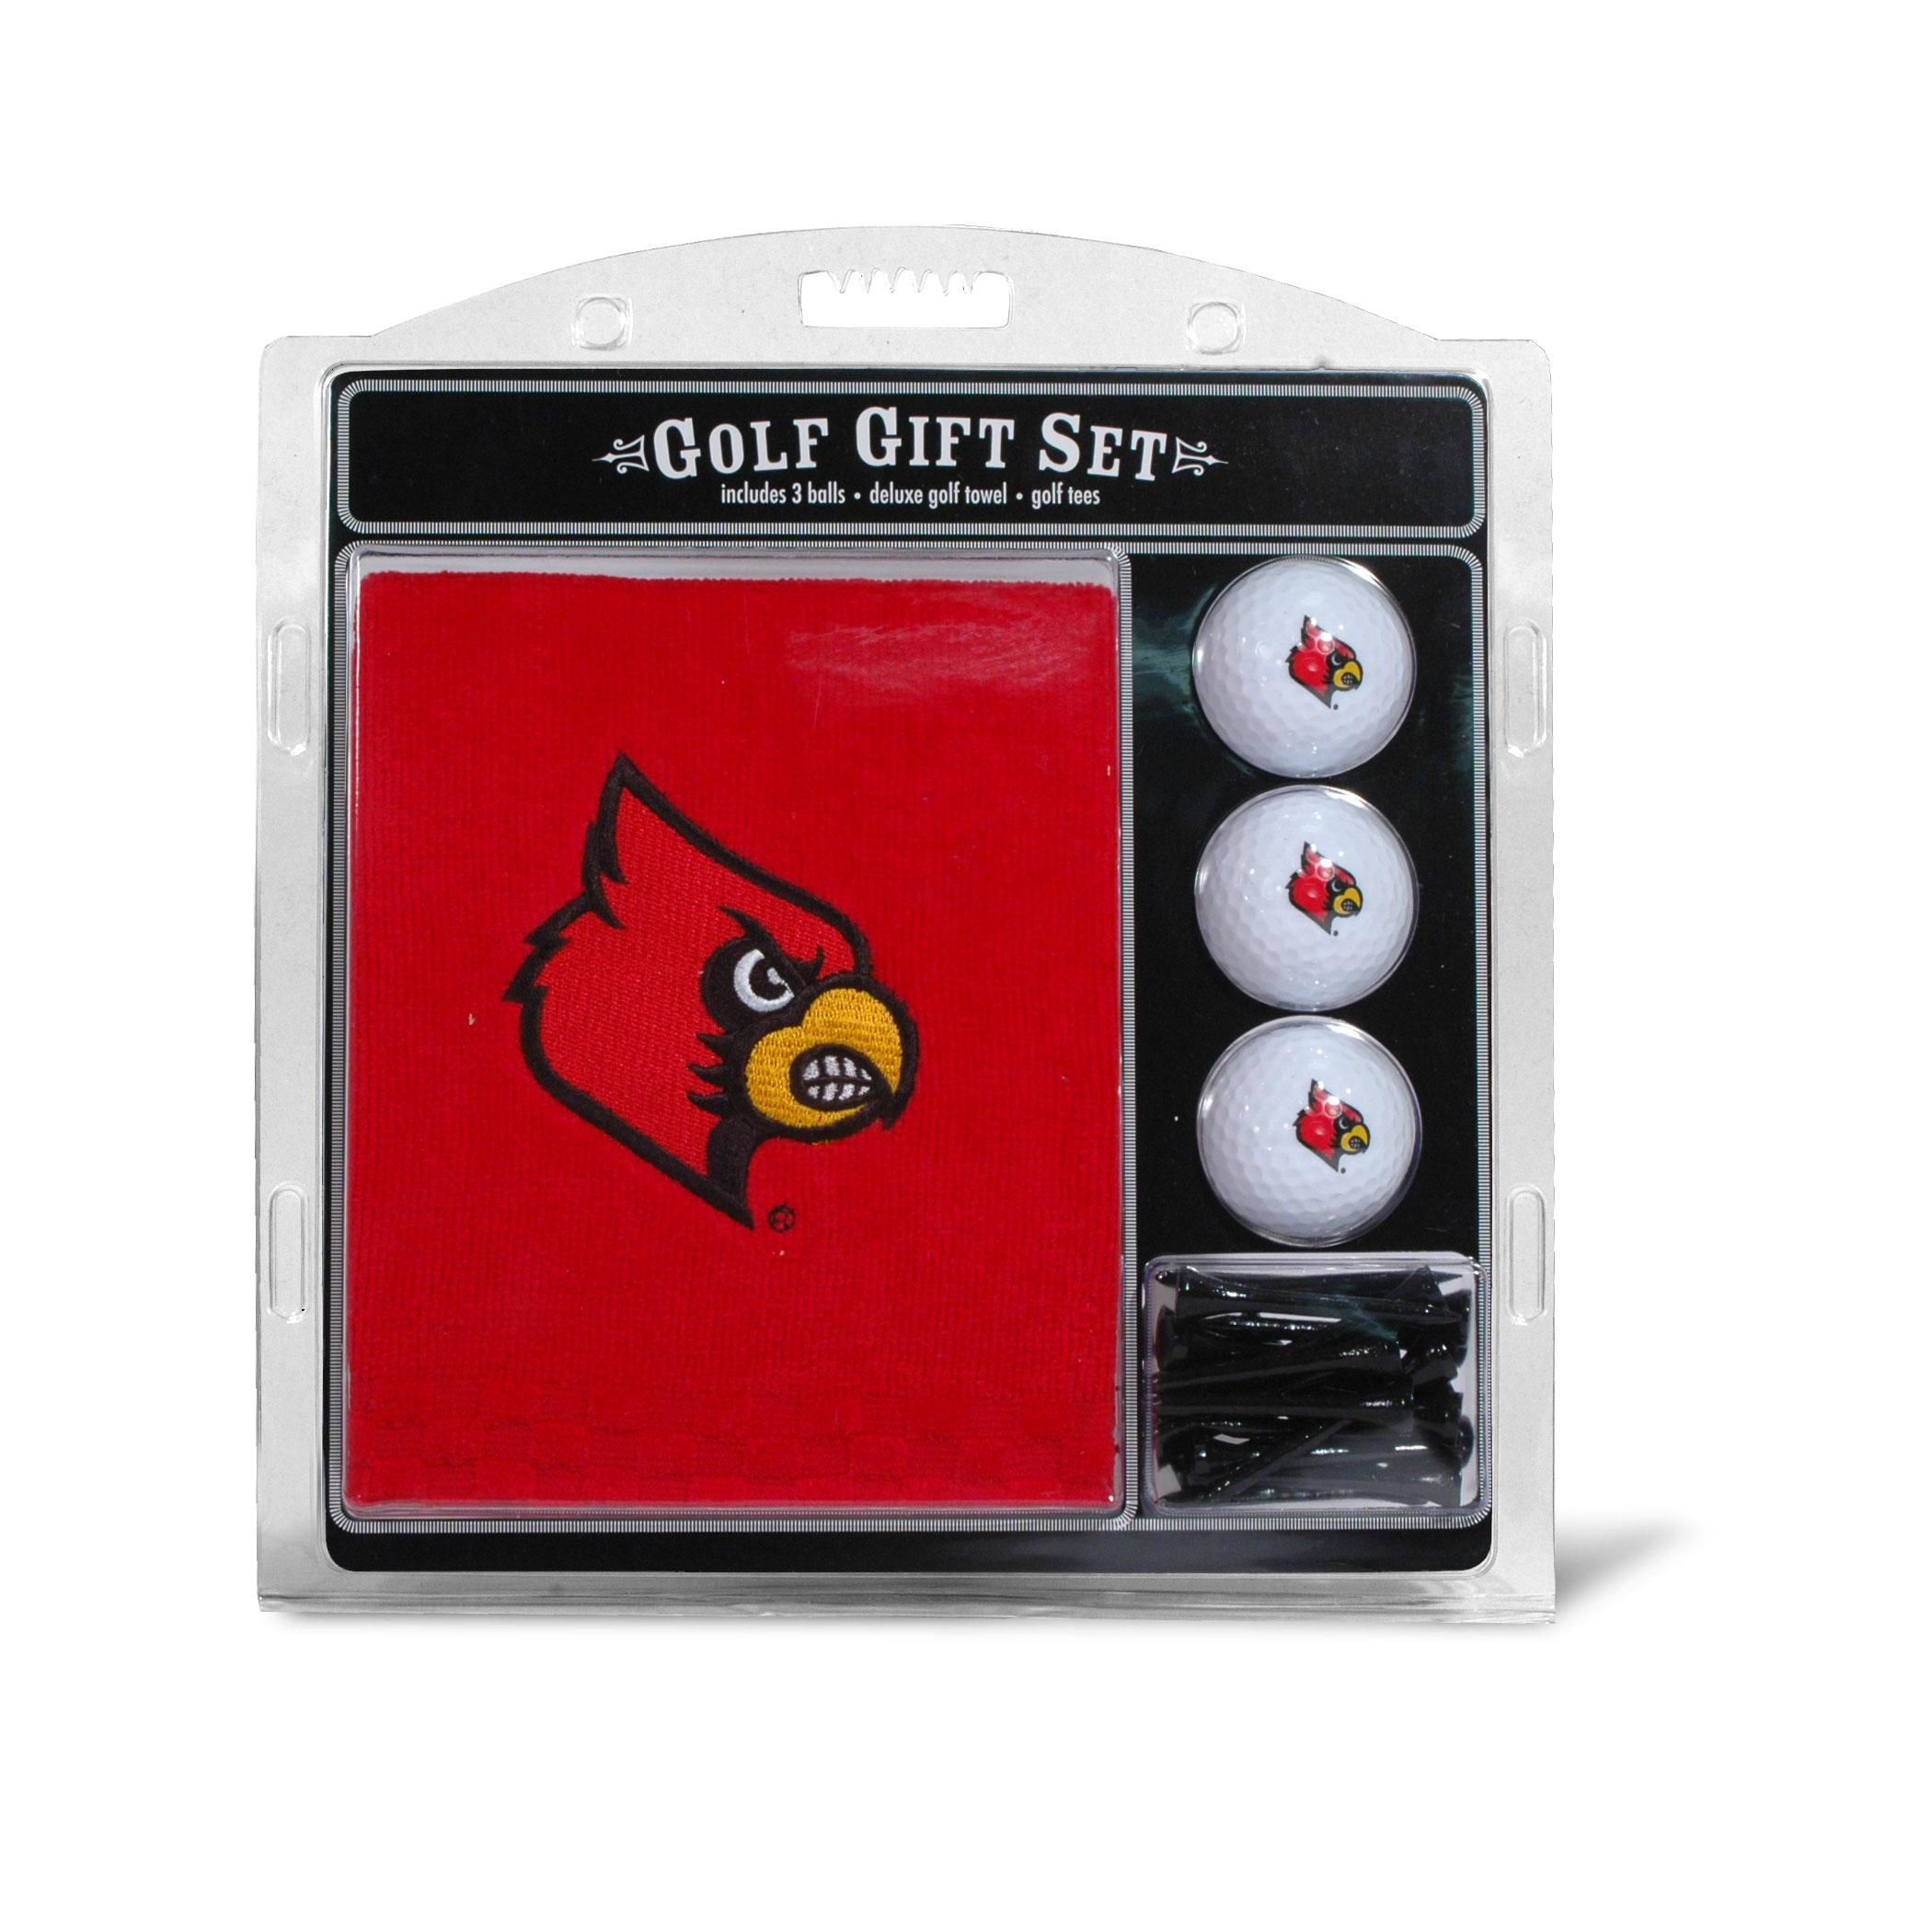 Louisville Cardinals Vintage Golf Driver Headcover - Sports Unlimited